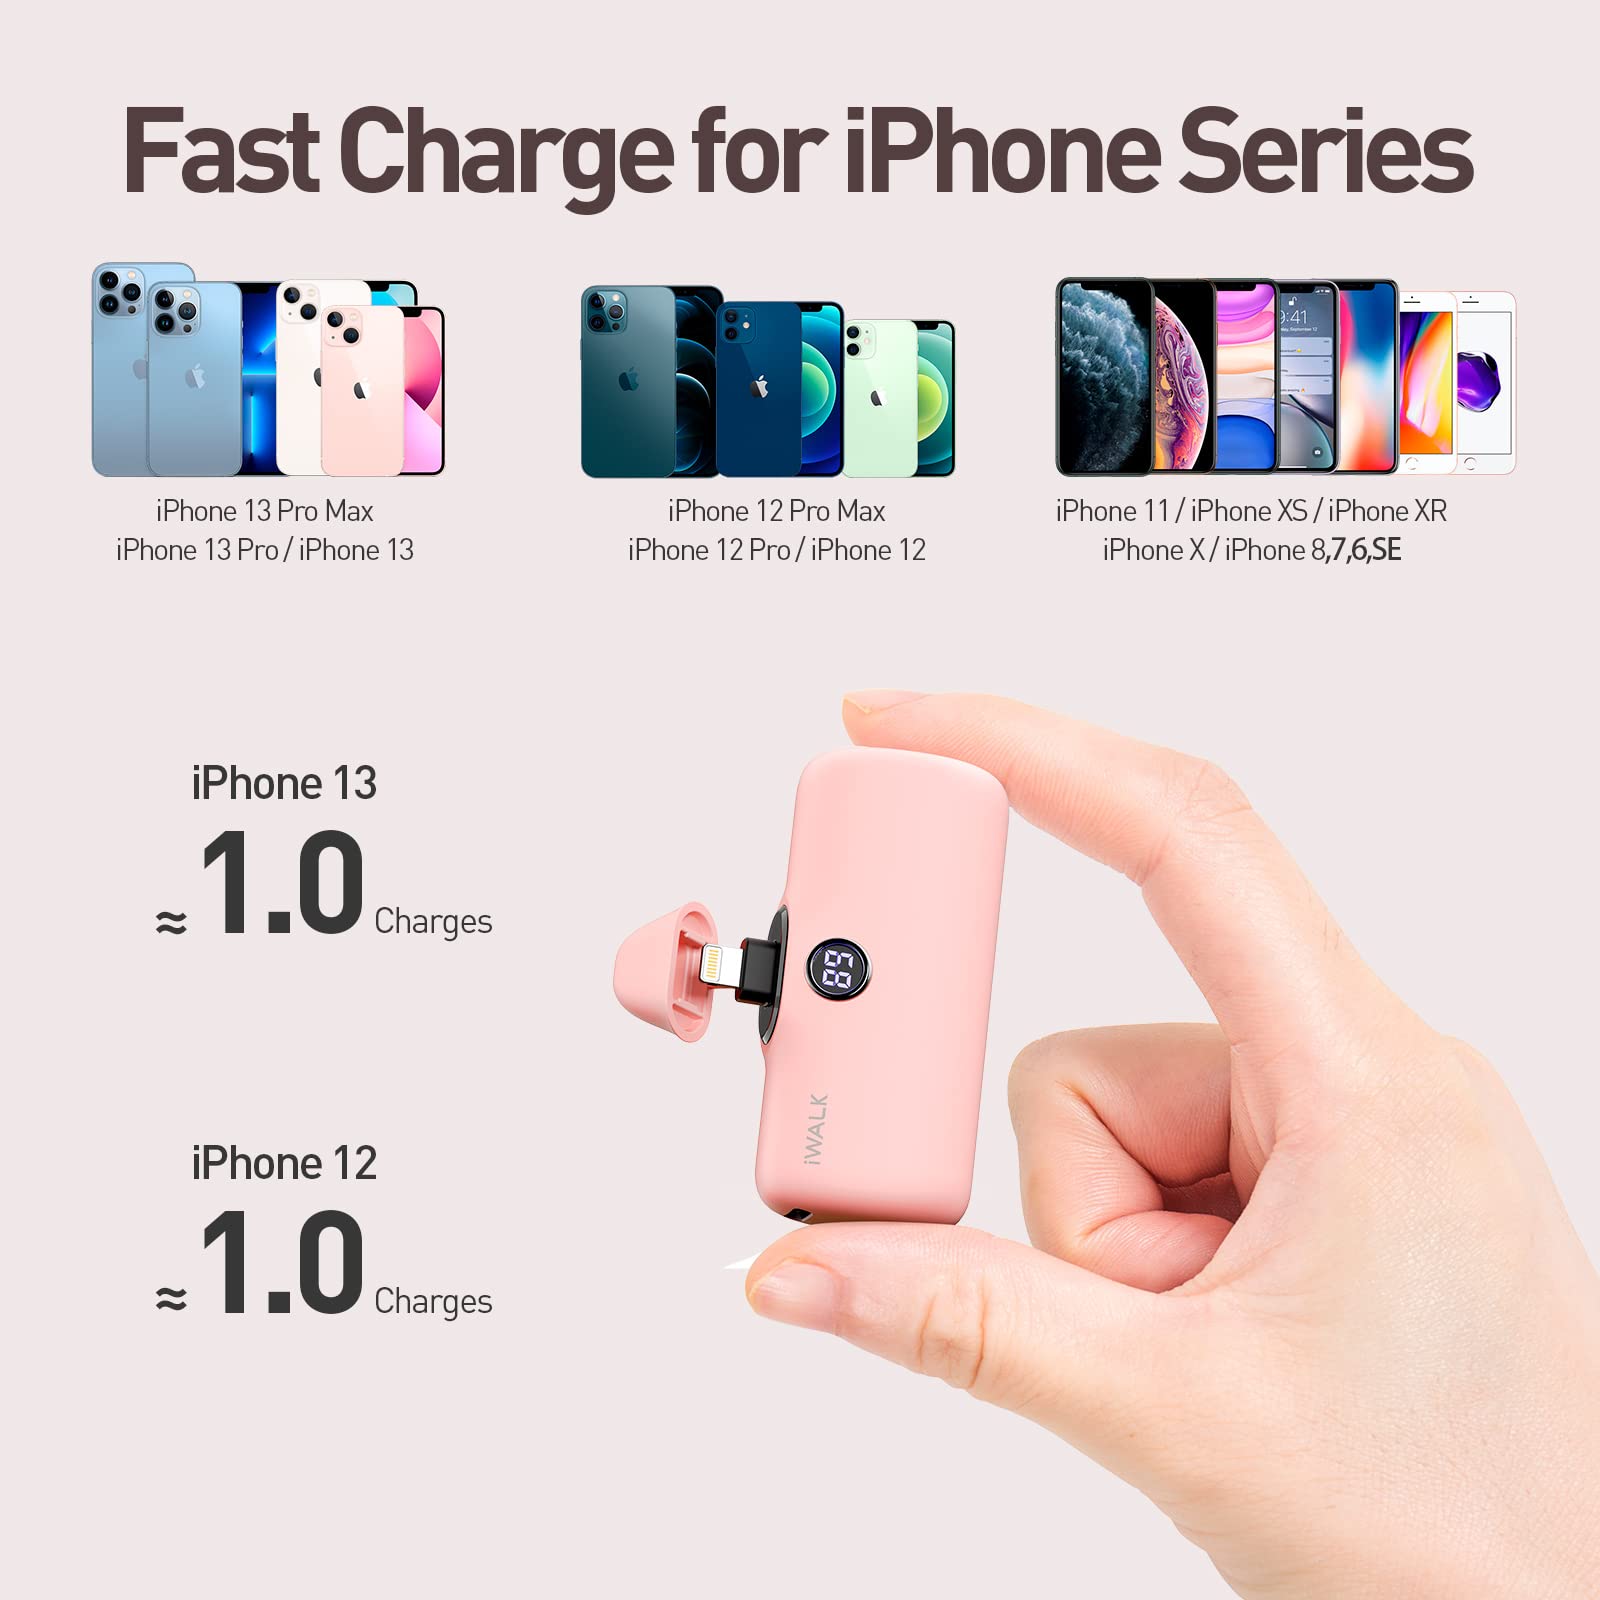 iWALK Portable Charger 4800mAh Power Bank Small and Cute Battery Pack Fast Charging power bank Compatible with iPhone 13/13 Pro/13 Pro Max /12/12 Pro/12 Pro Max/11 Pro/XR/X/8/Plus，Pink